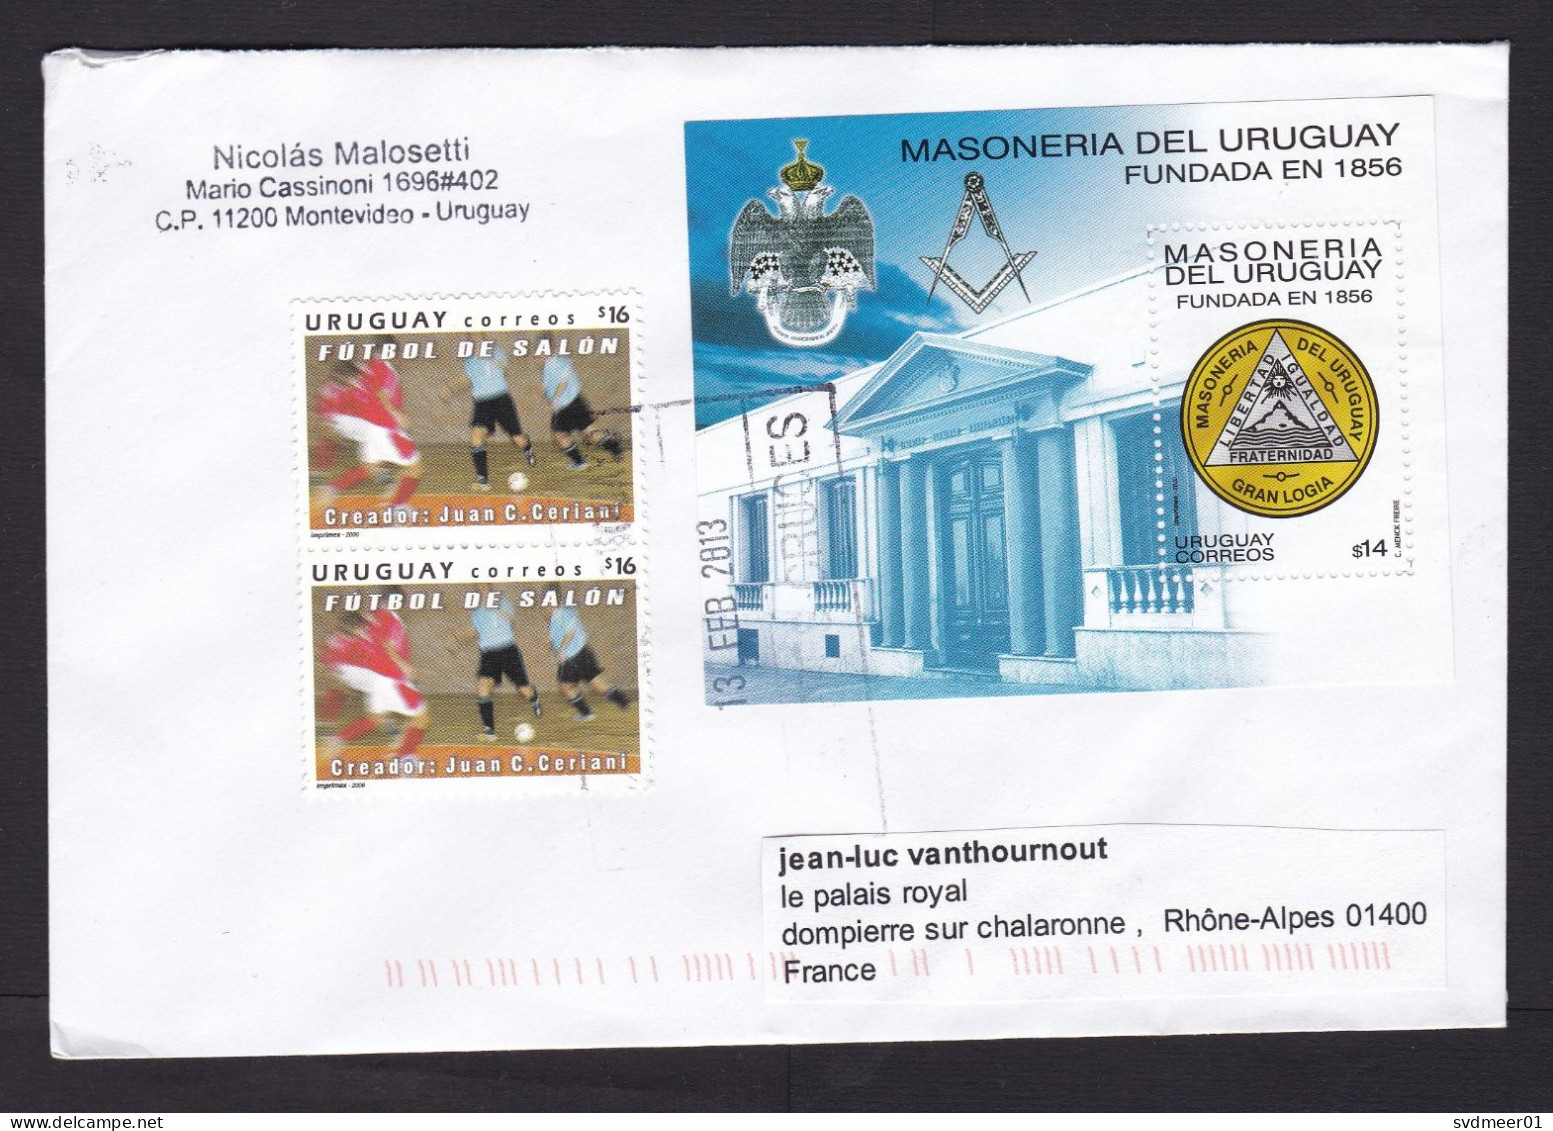 Uruguay: Cover To France, 2013, 3 Stamps, Souvenir Sheet, Freemasonry, Soccer, Football, Rare Real Use (traces Of Use) - Uruguay